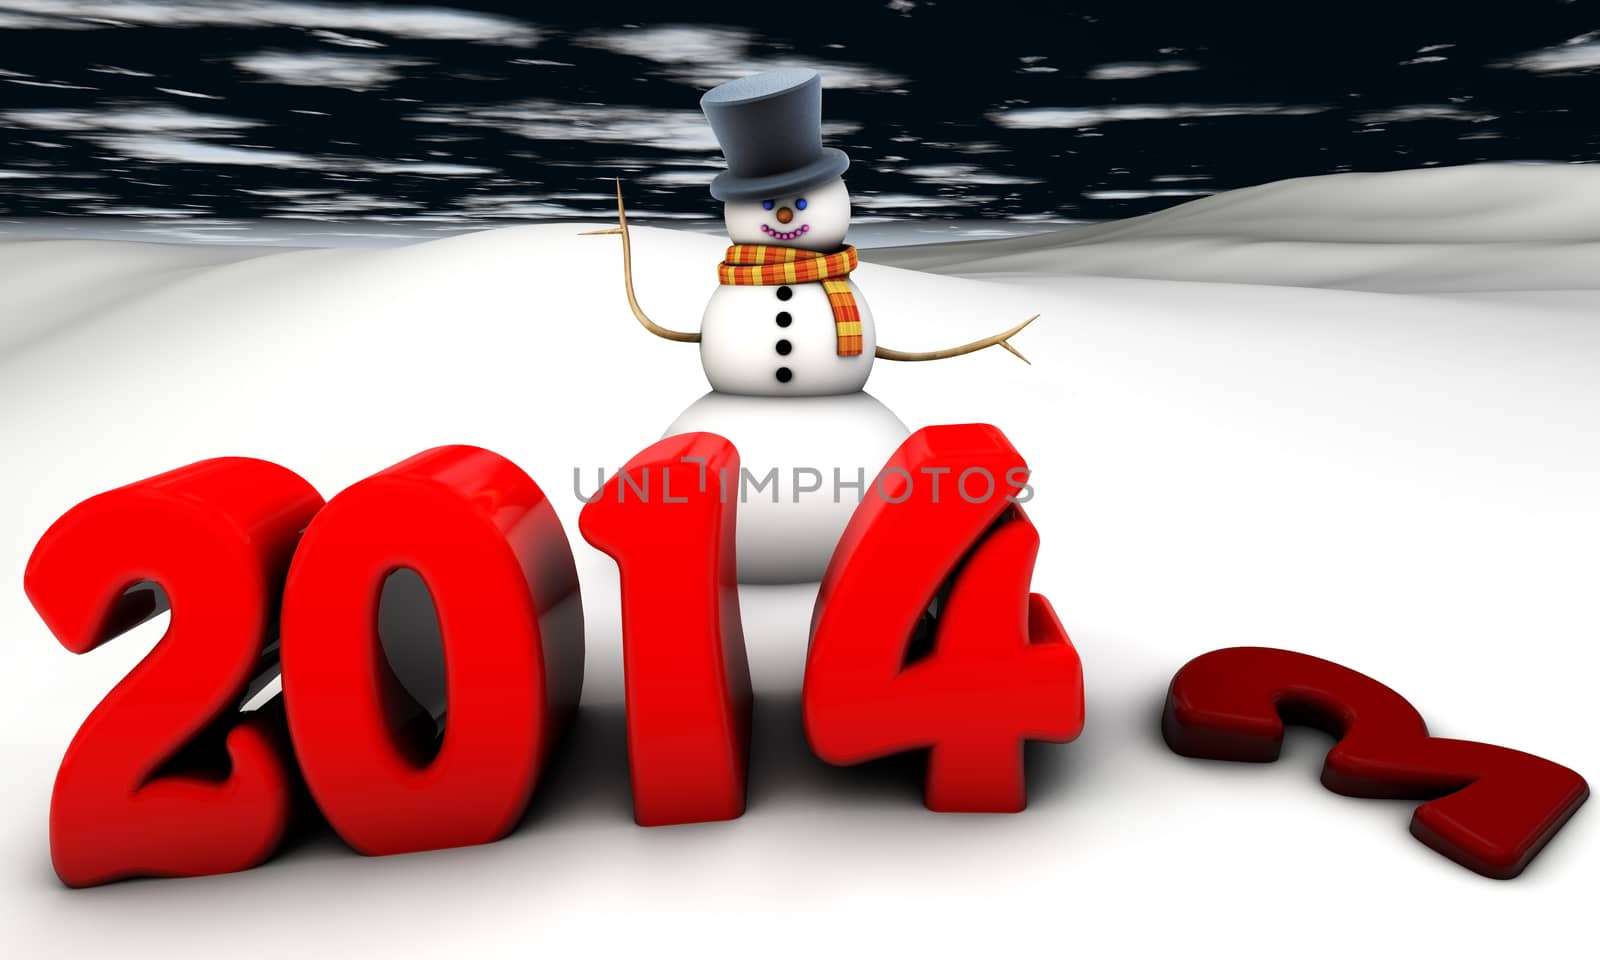 scene with snowman greeting the new year 2014 made ​​in 3d